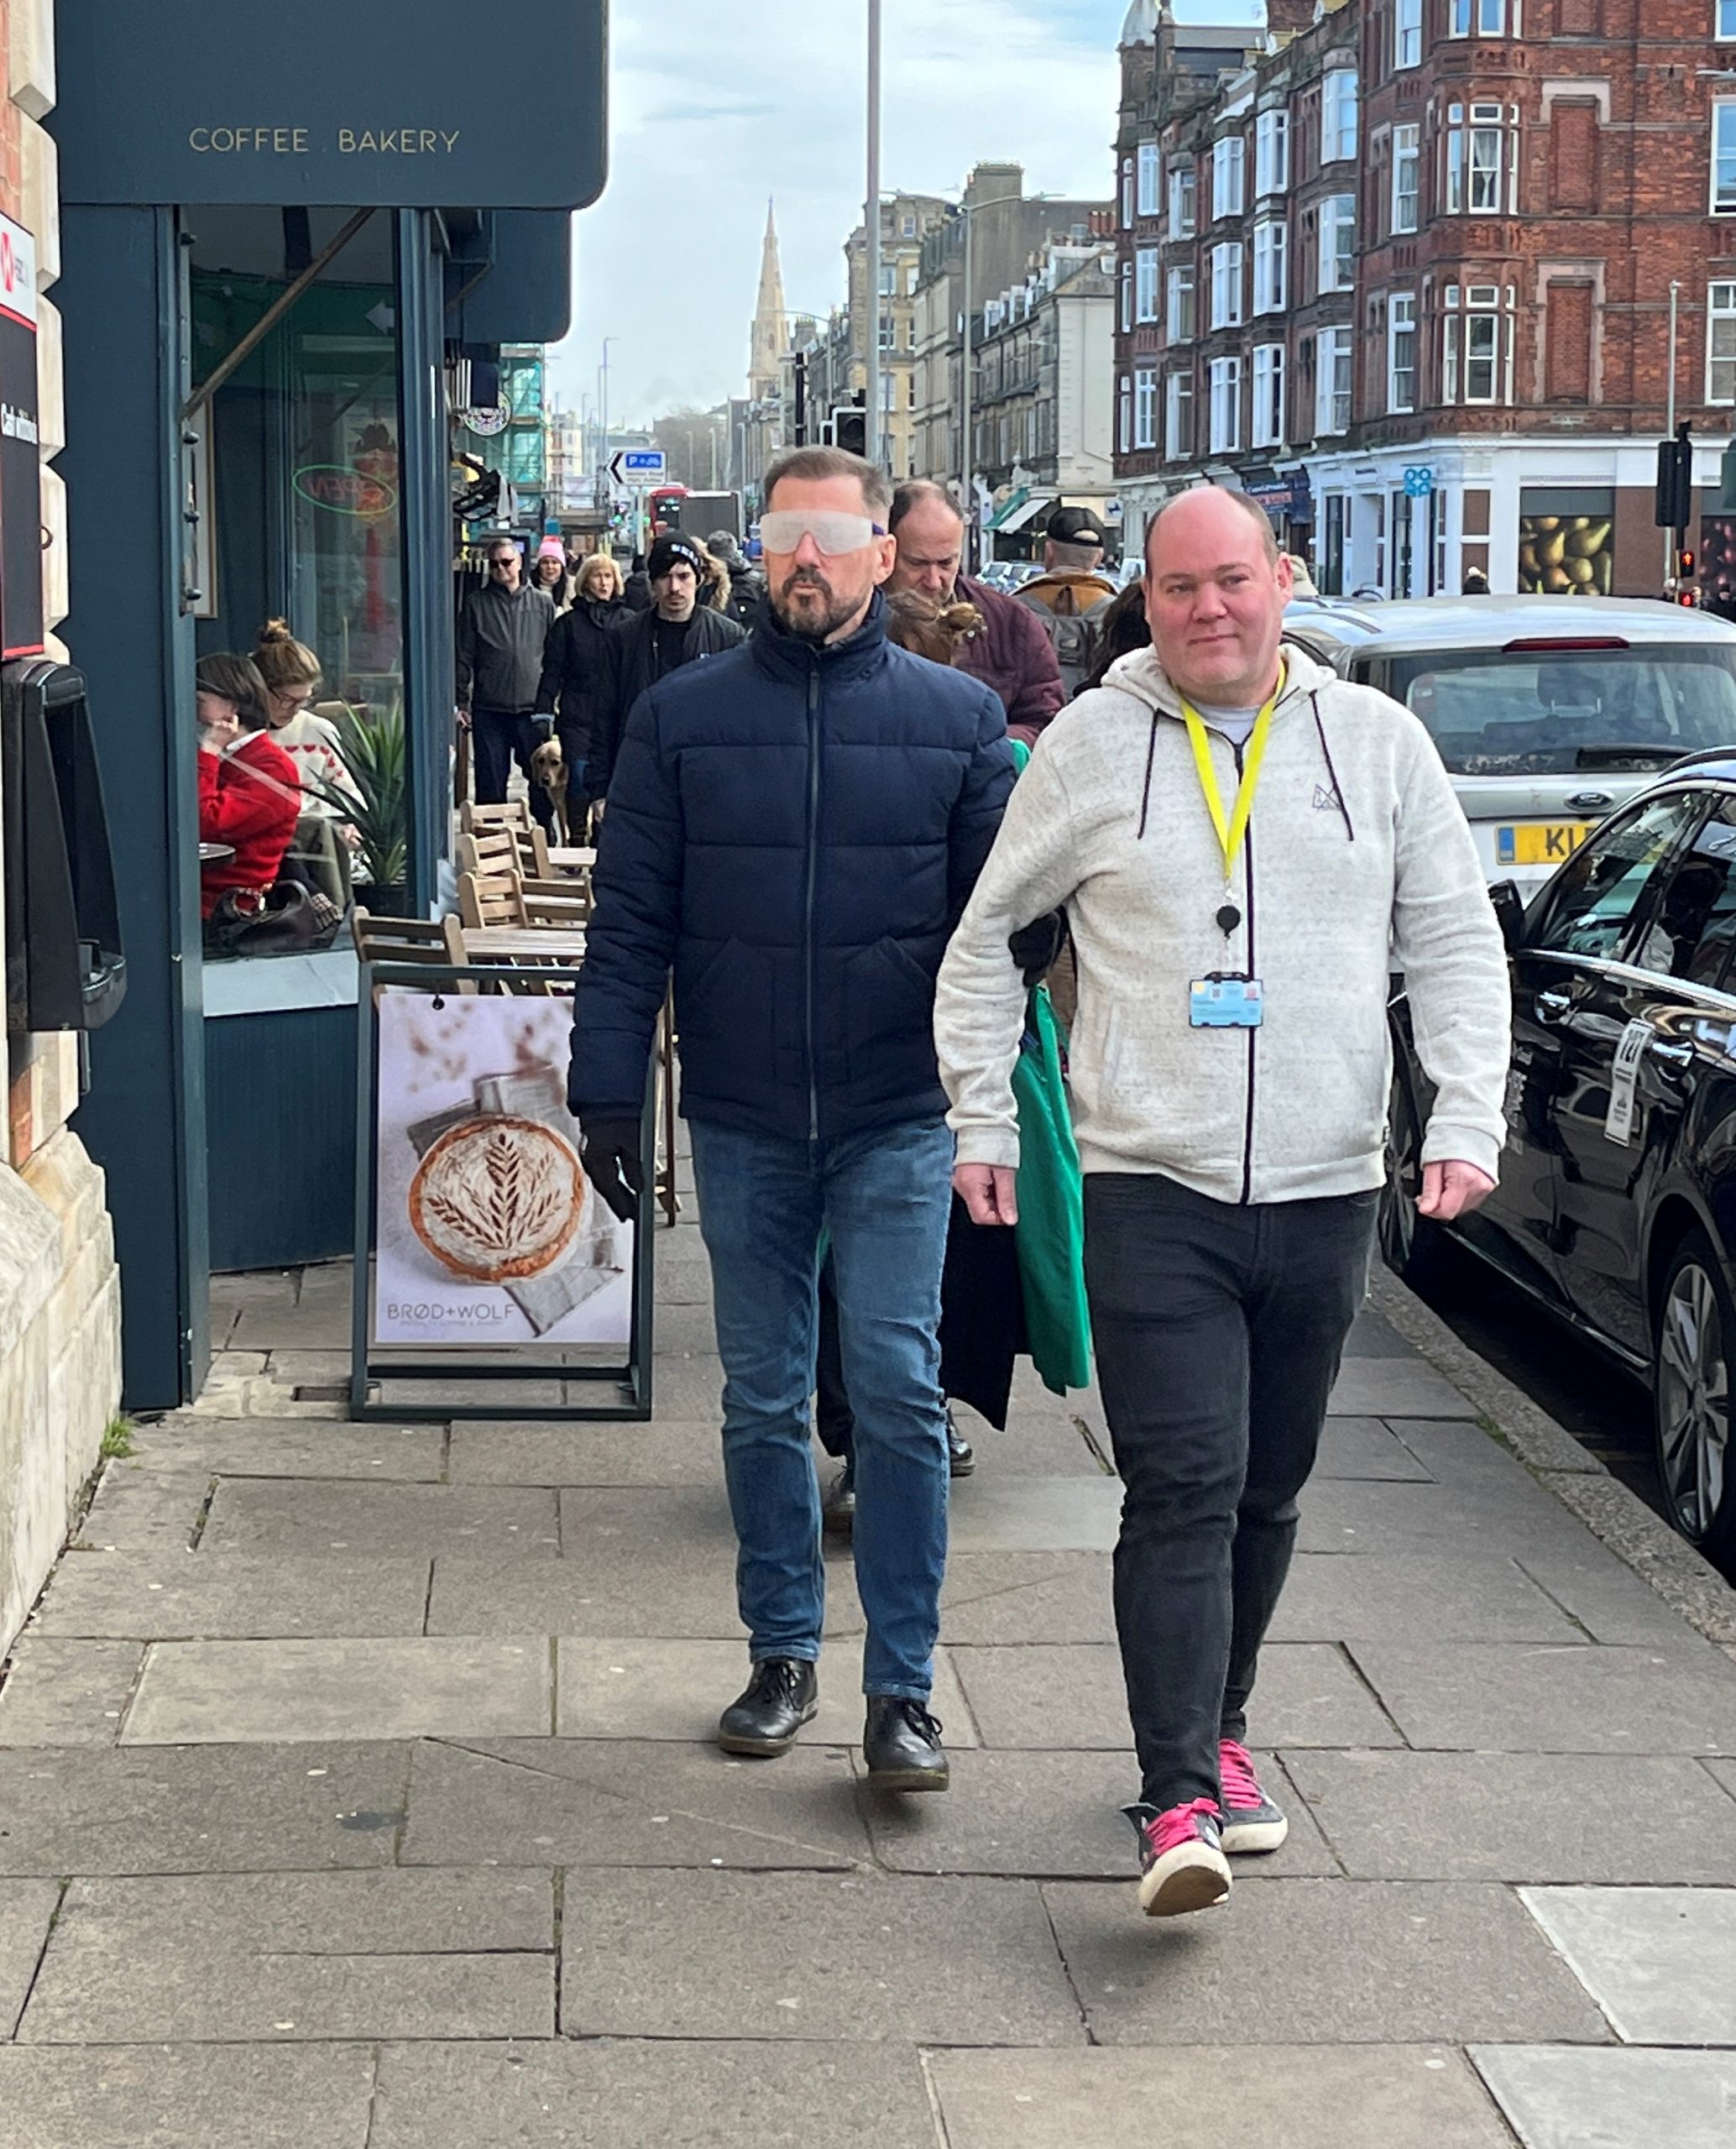 Two attendees from Brighton & Hove City Council on the sim spec walk. They are walking down a street with outdoor furniture seen outside a café. One man is wearing sim specs and being guided.